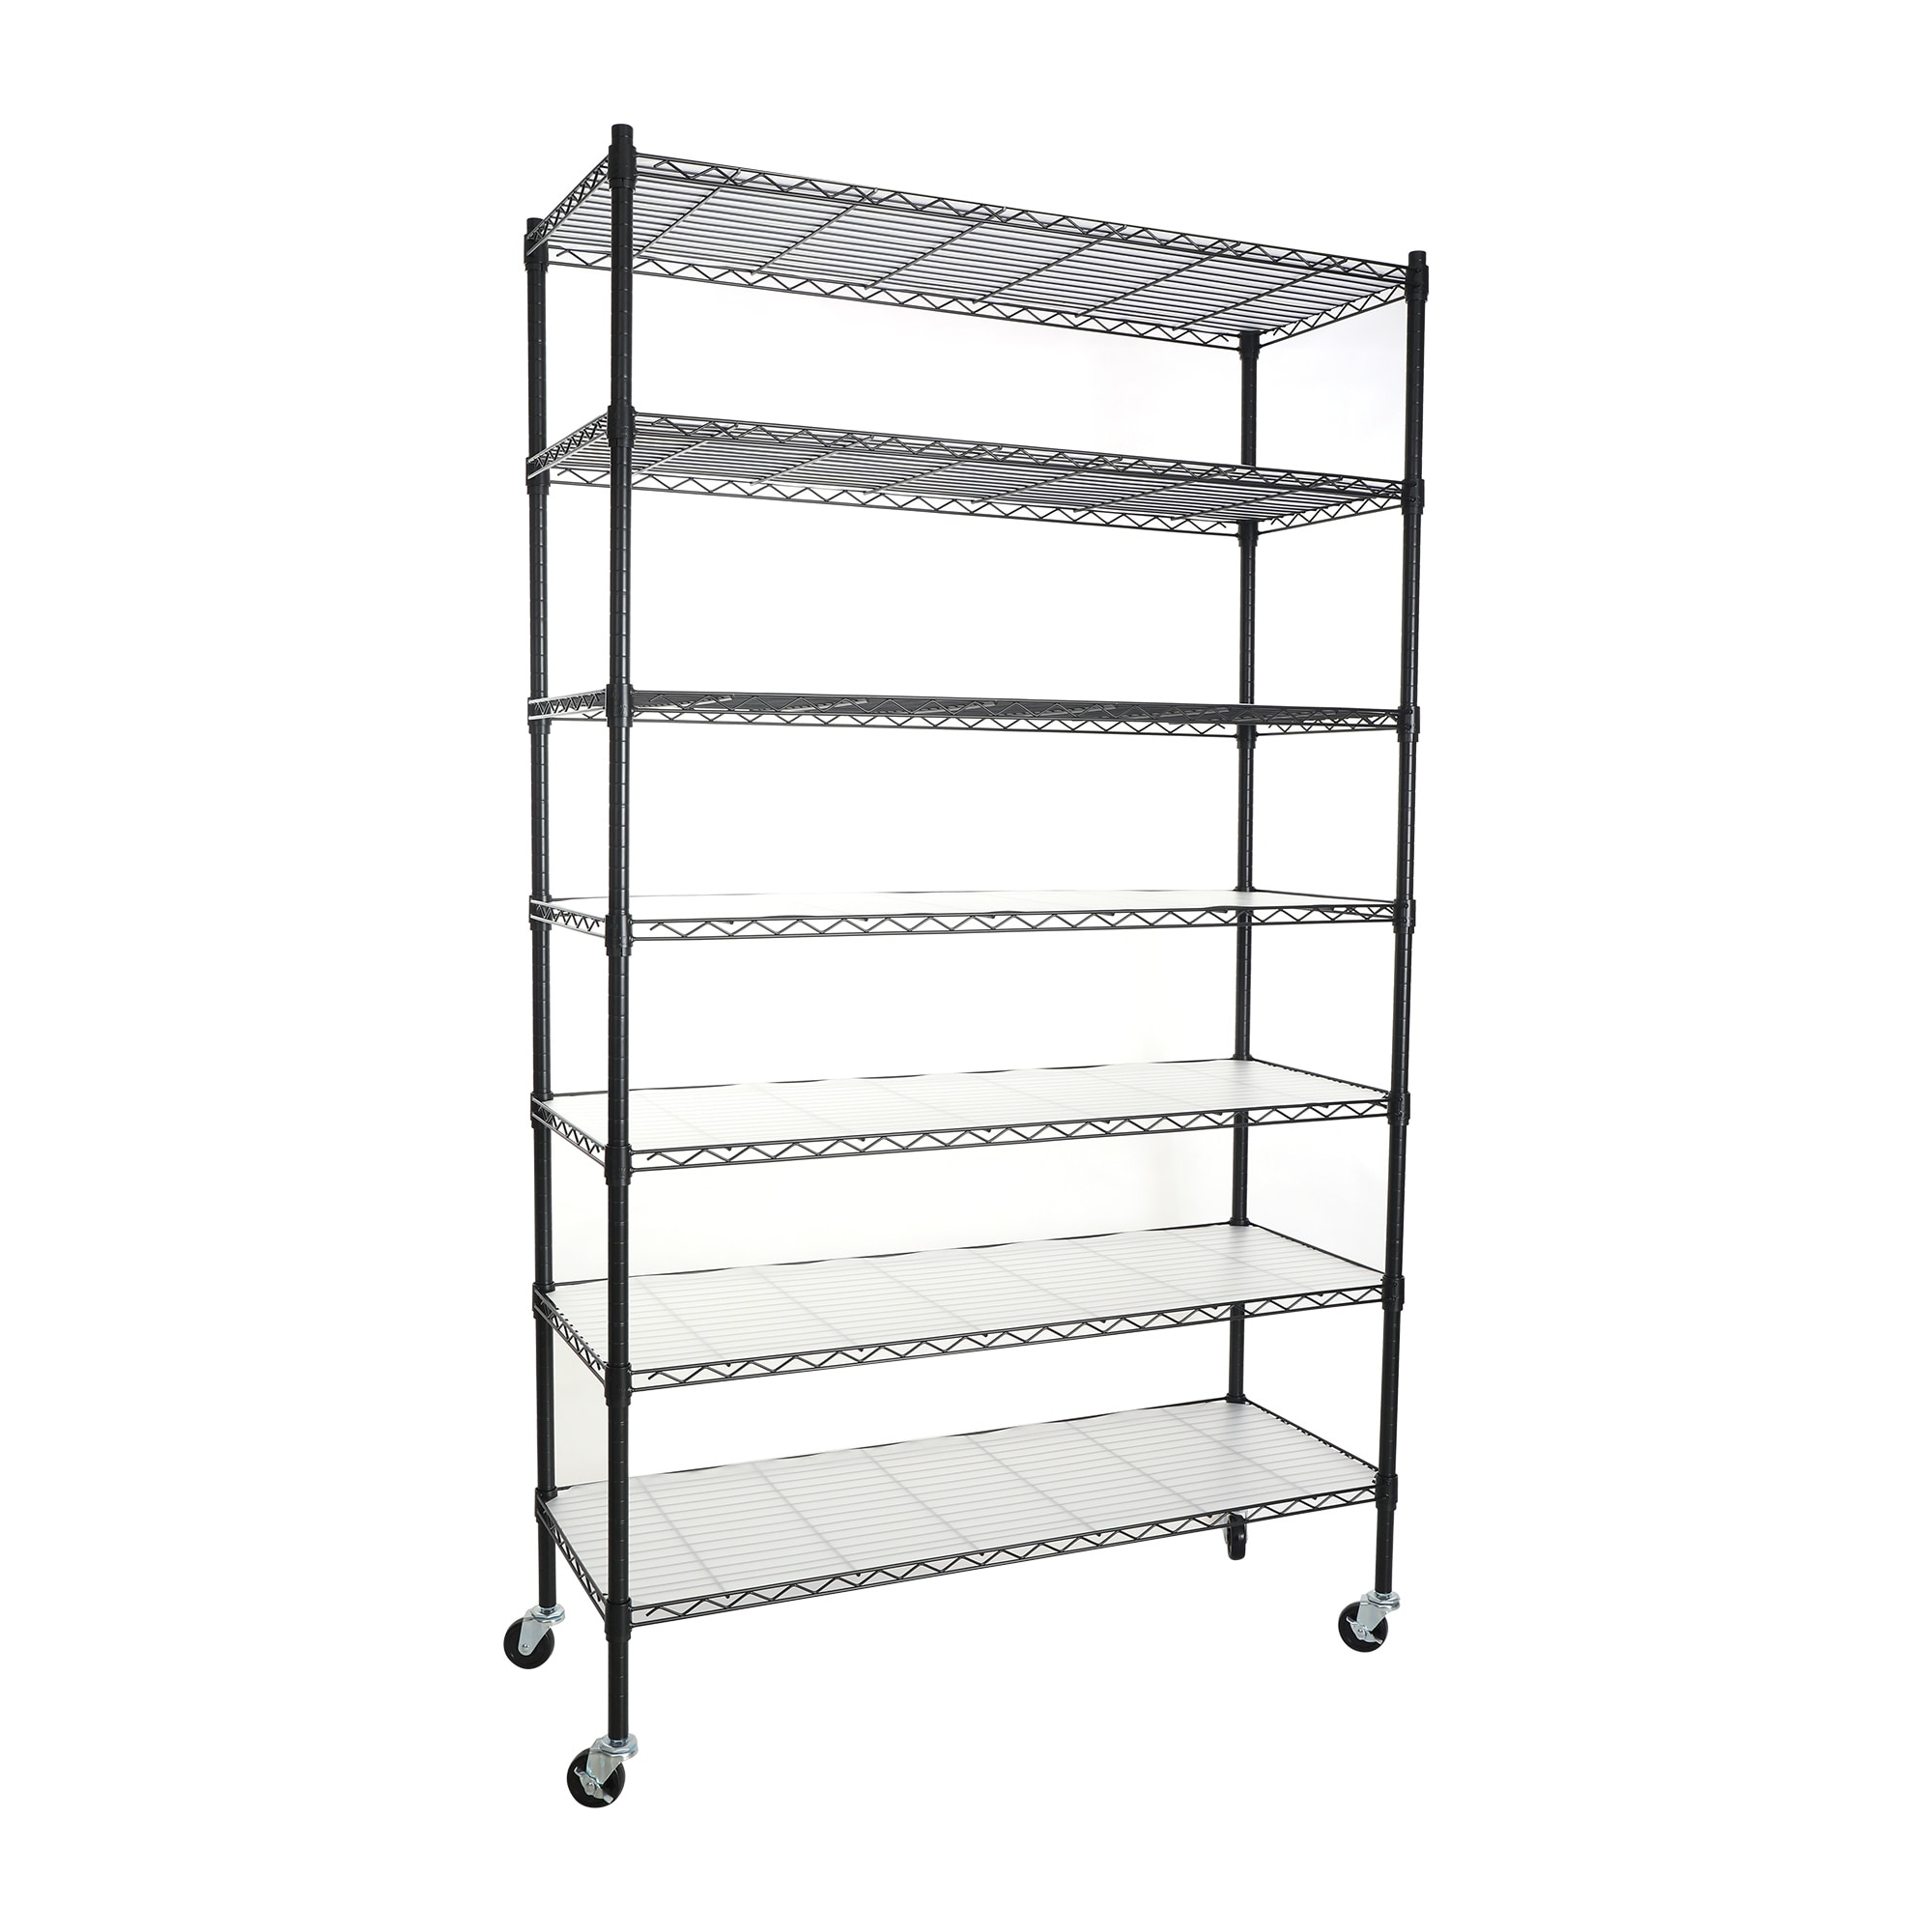 https://ak1.ostkcdn.com/images/products/is/images/direct/58b8007e2c53ae8da946a9ce9e10636be91e1daa/7-Tier-Wire-Shelving-Unit-Metal-Garage-Storage-Shelves-with-Wheels.jpg